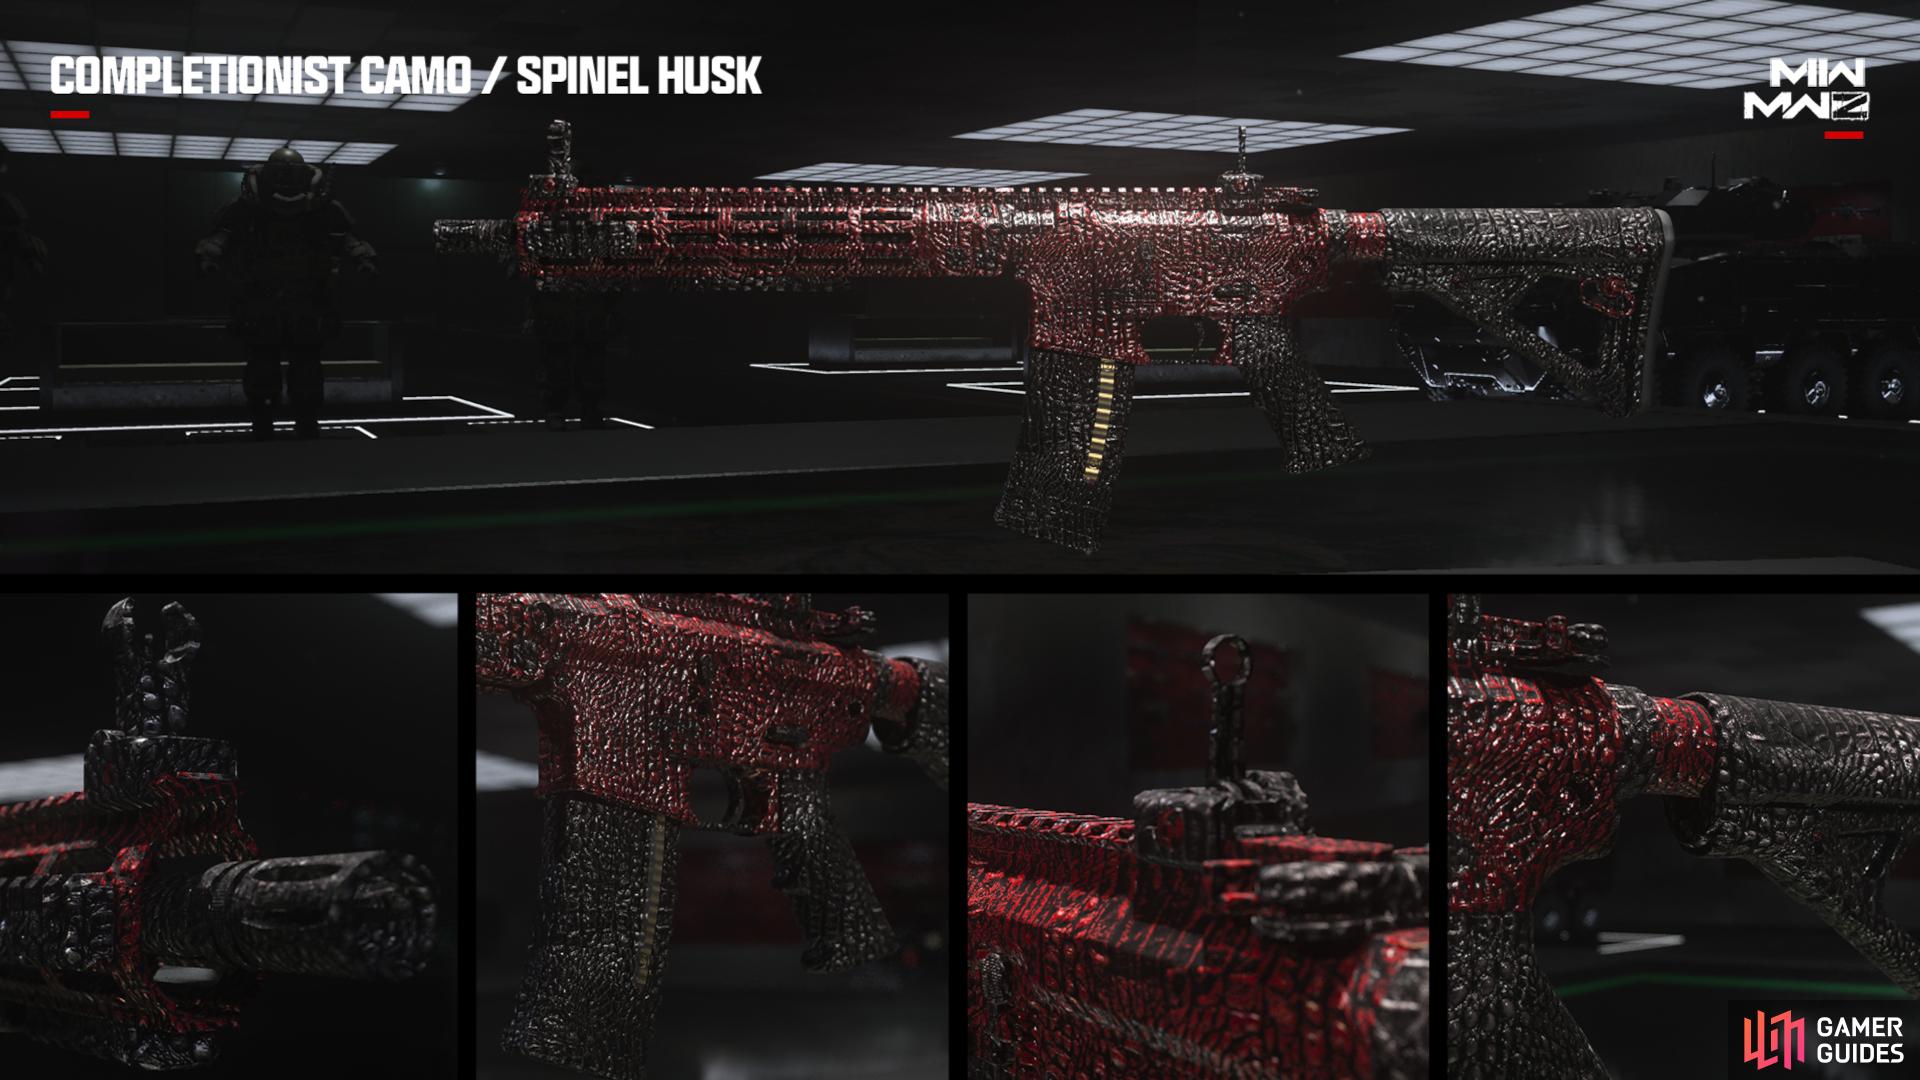 The Spinel Husk Camo Challenges become avilable for MW2 Zombie pregression enthusiasts. Image via Activision.